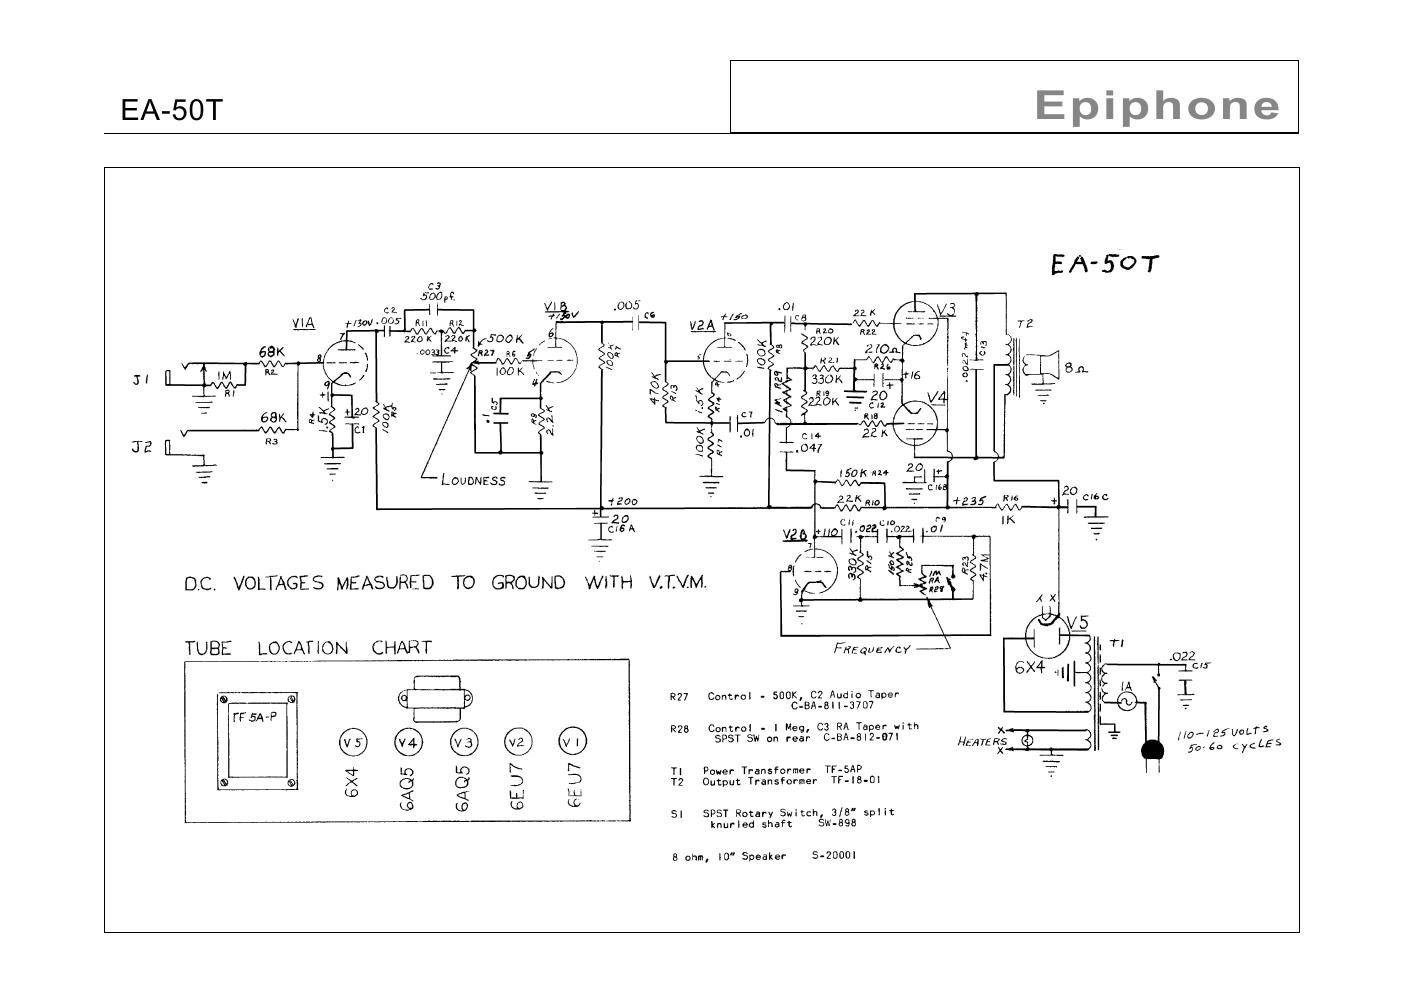 epiphone ea 50t pacemaker tremelo schematic